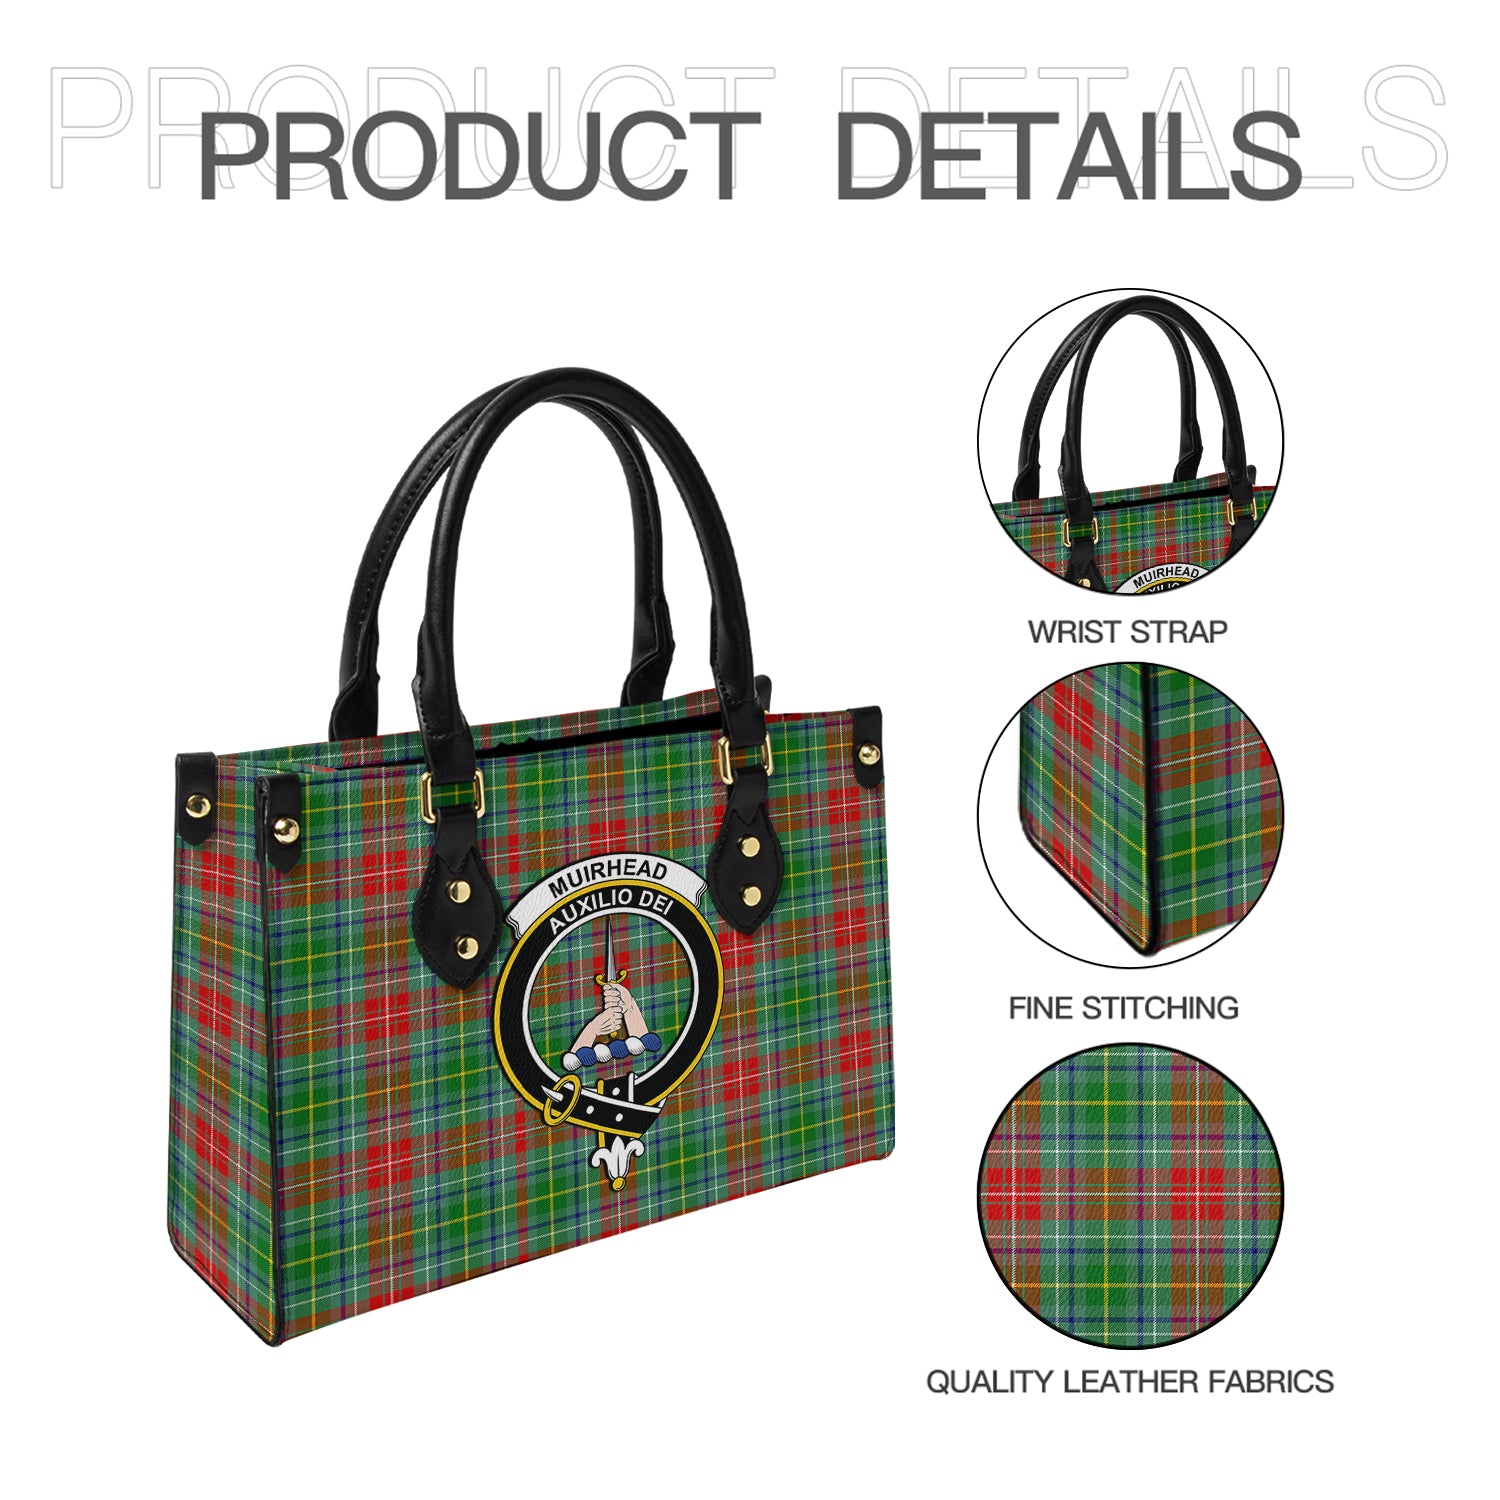 muirhead-tartan-leather-bag-with-family-crest